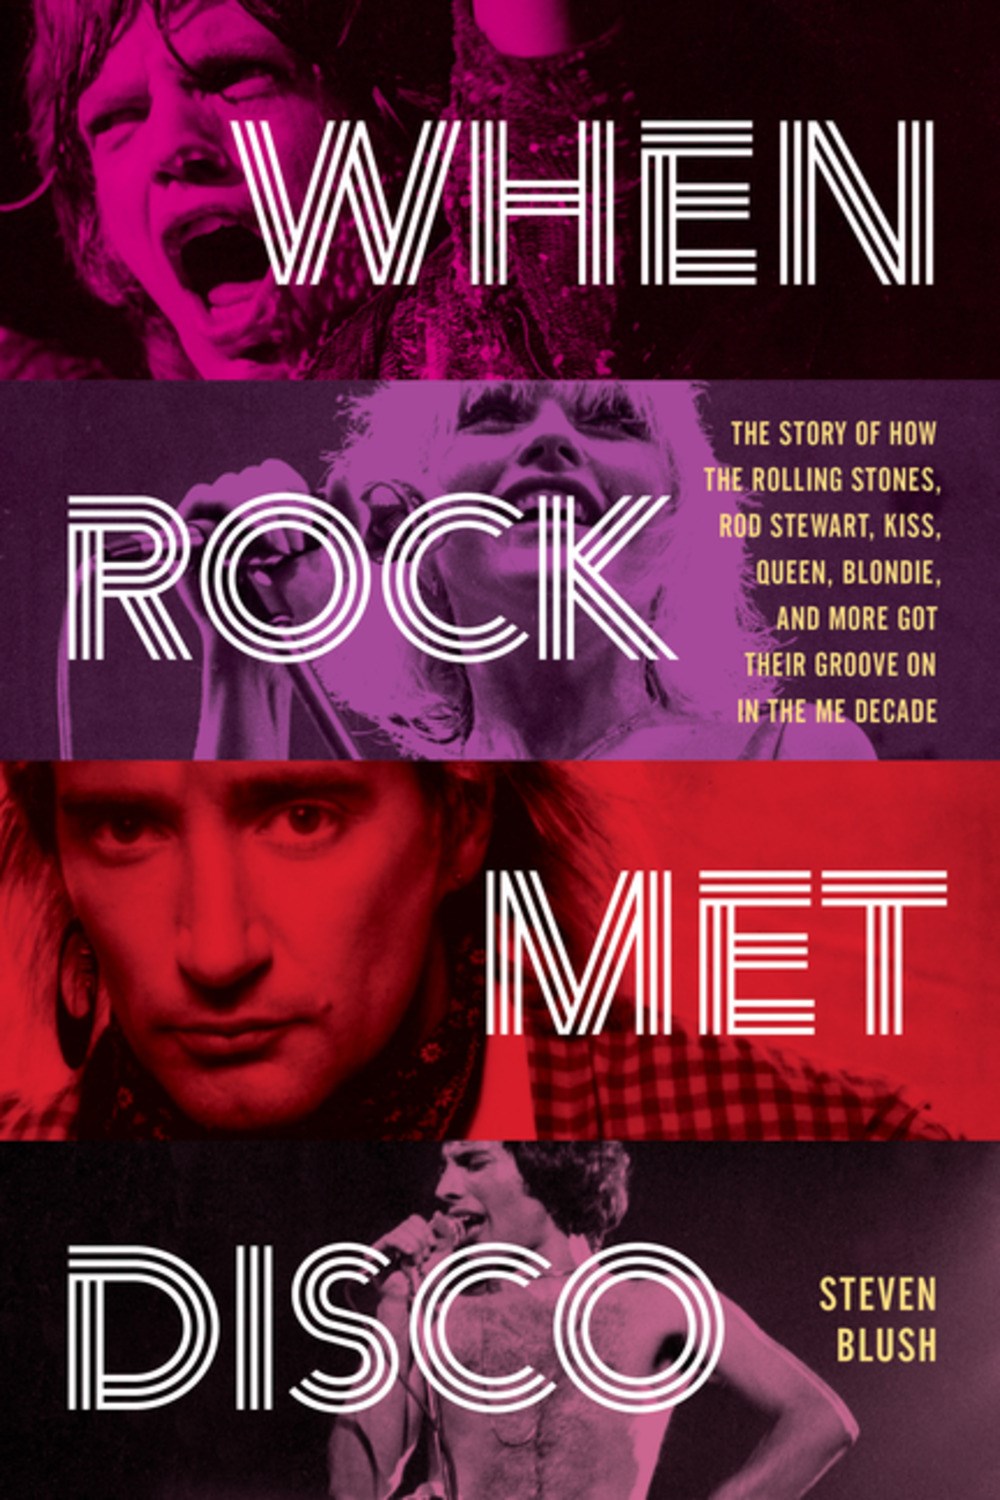 When Rock Met Disco: The Story of How the Rolling Stones, Rod Stewart, KISS, Queen, Blondie, and More Got Their Groove On in the Me Decade